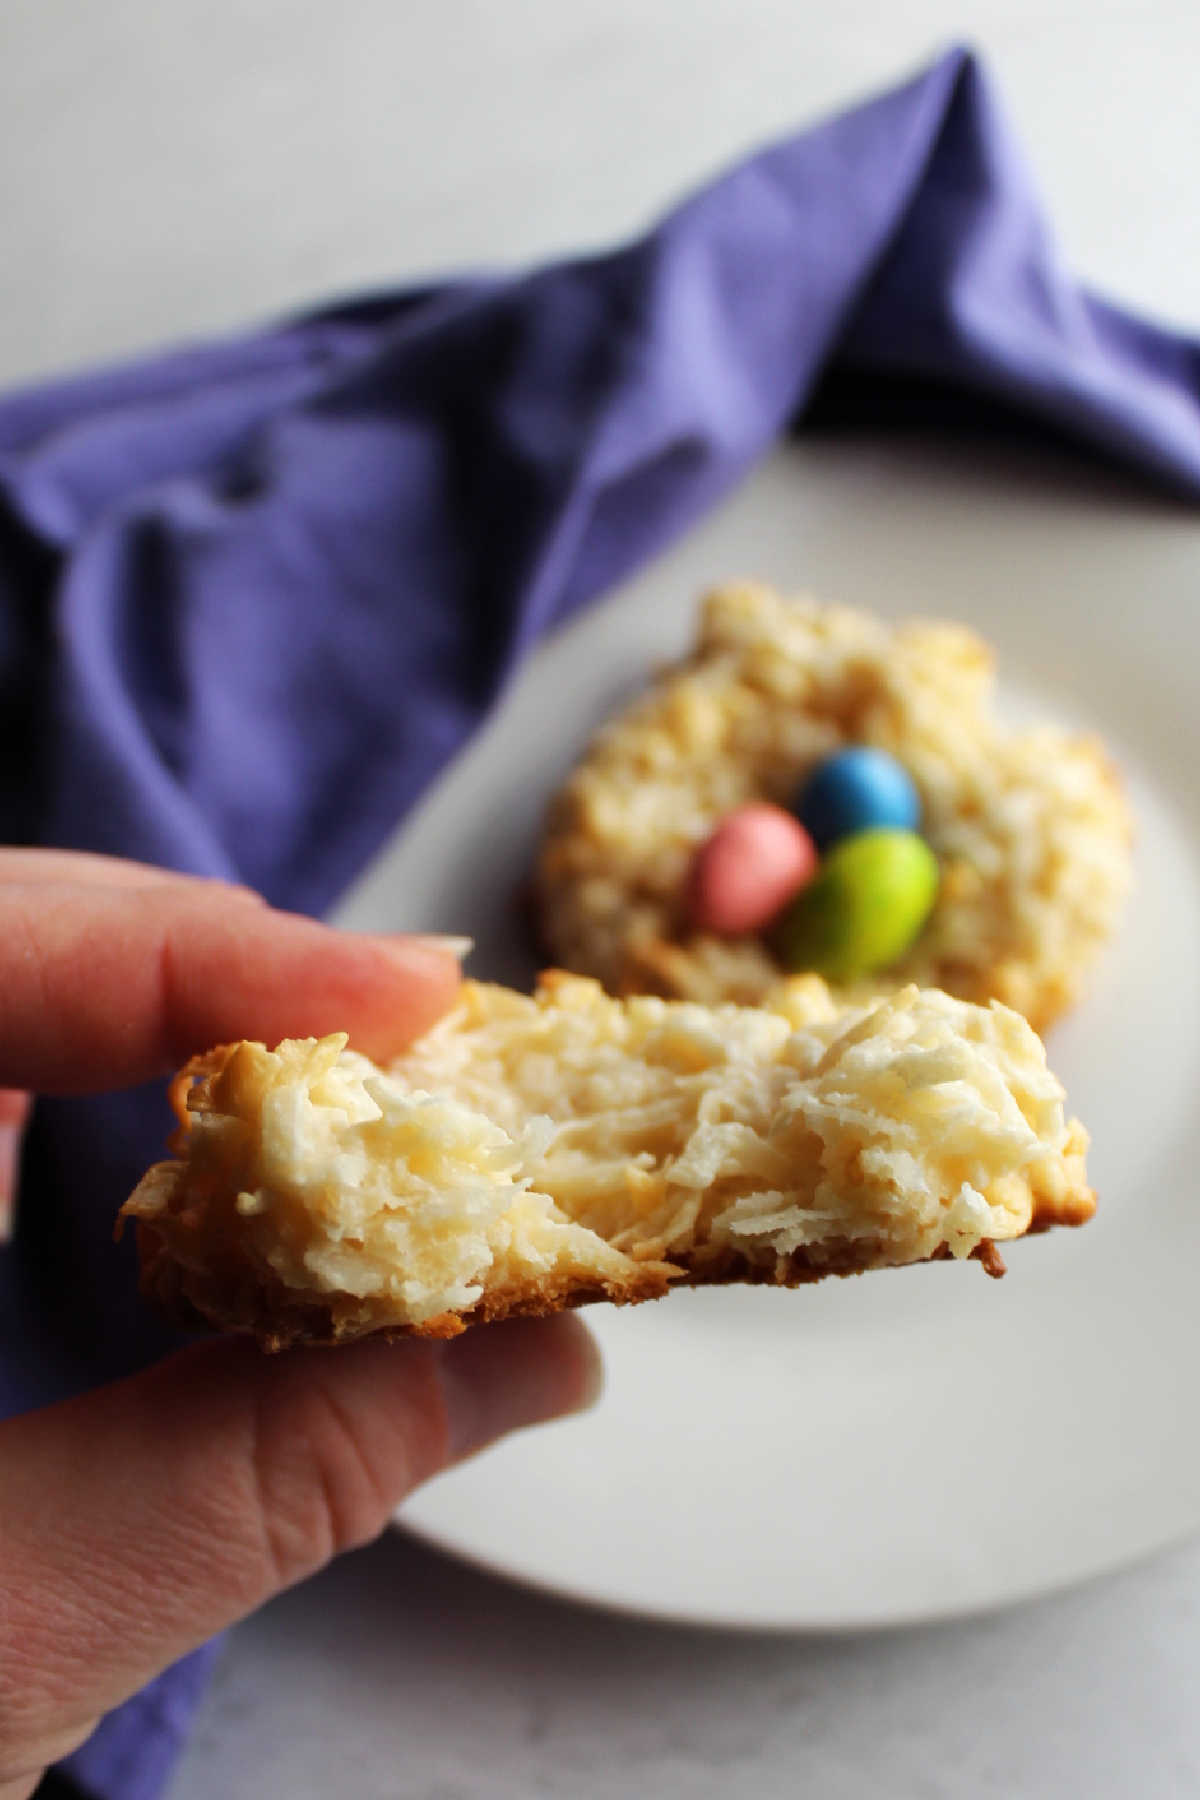 Coconut macaroon nest with a bite taken out showing the chewy center.